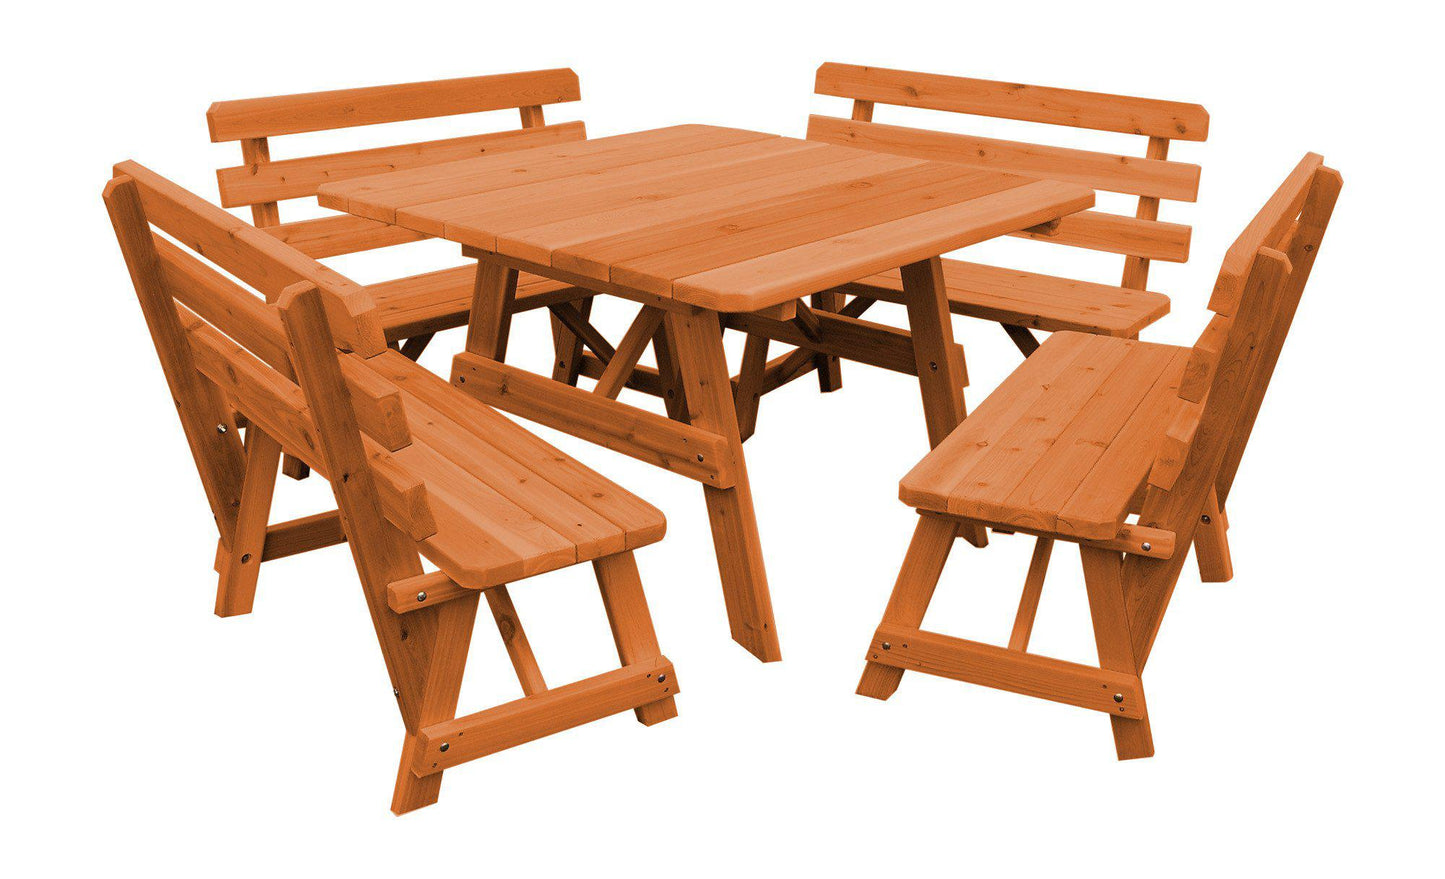 A&L FURNITURE CO. Western Red Cedar 43" Square Table w/ 4 Backed Benches- Specify for FREE 2" Umbrella Hole - LEAD TIME TO SHIP 2 WEEKS